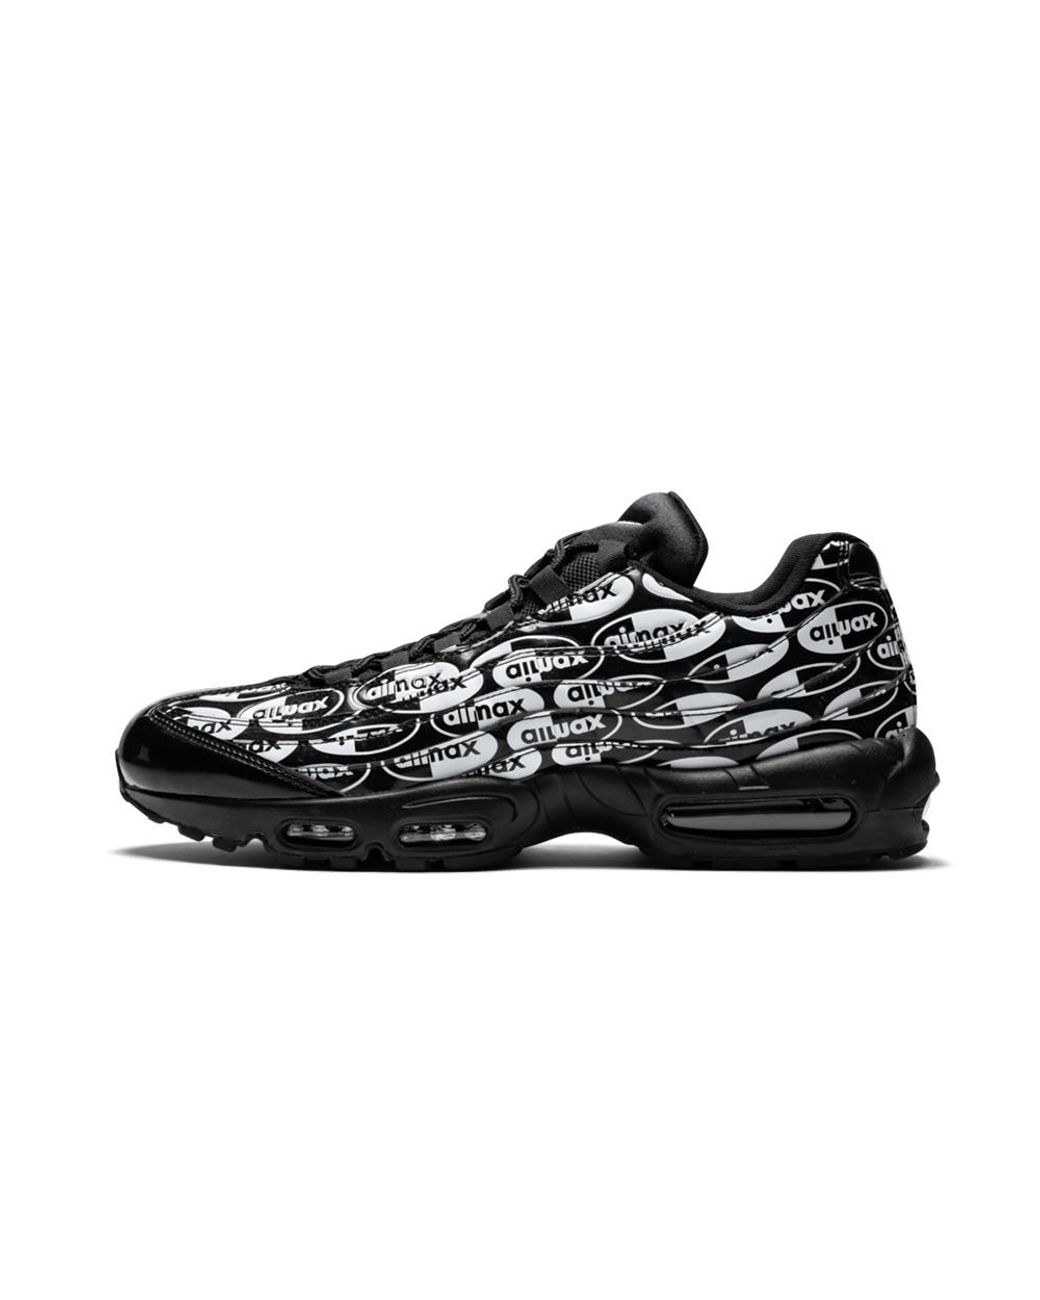 Nike Air Max 95 Prm Shoes - Size 7 in Black/White (Black) for Men ...